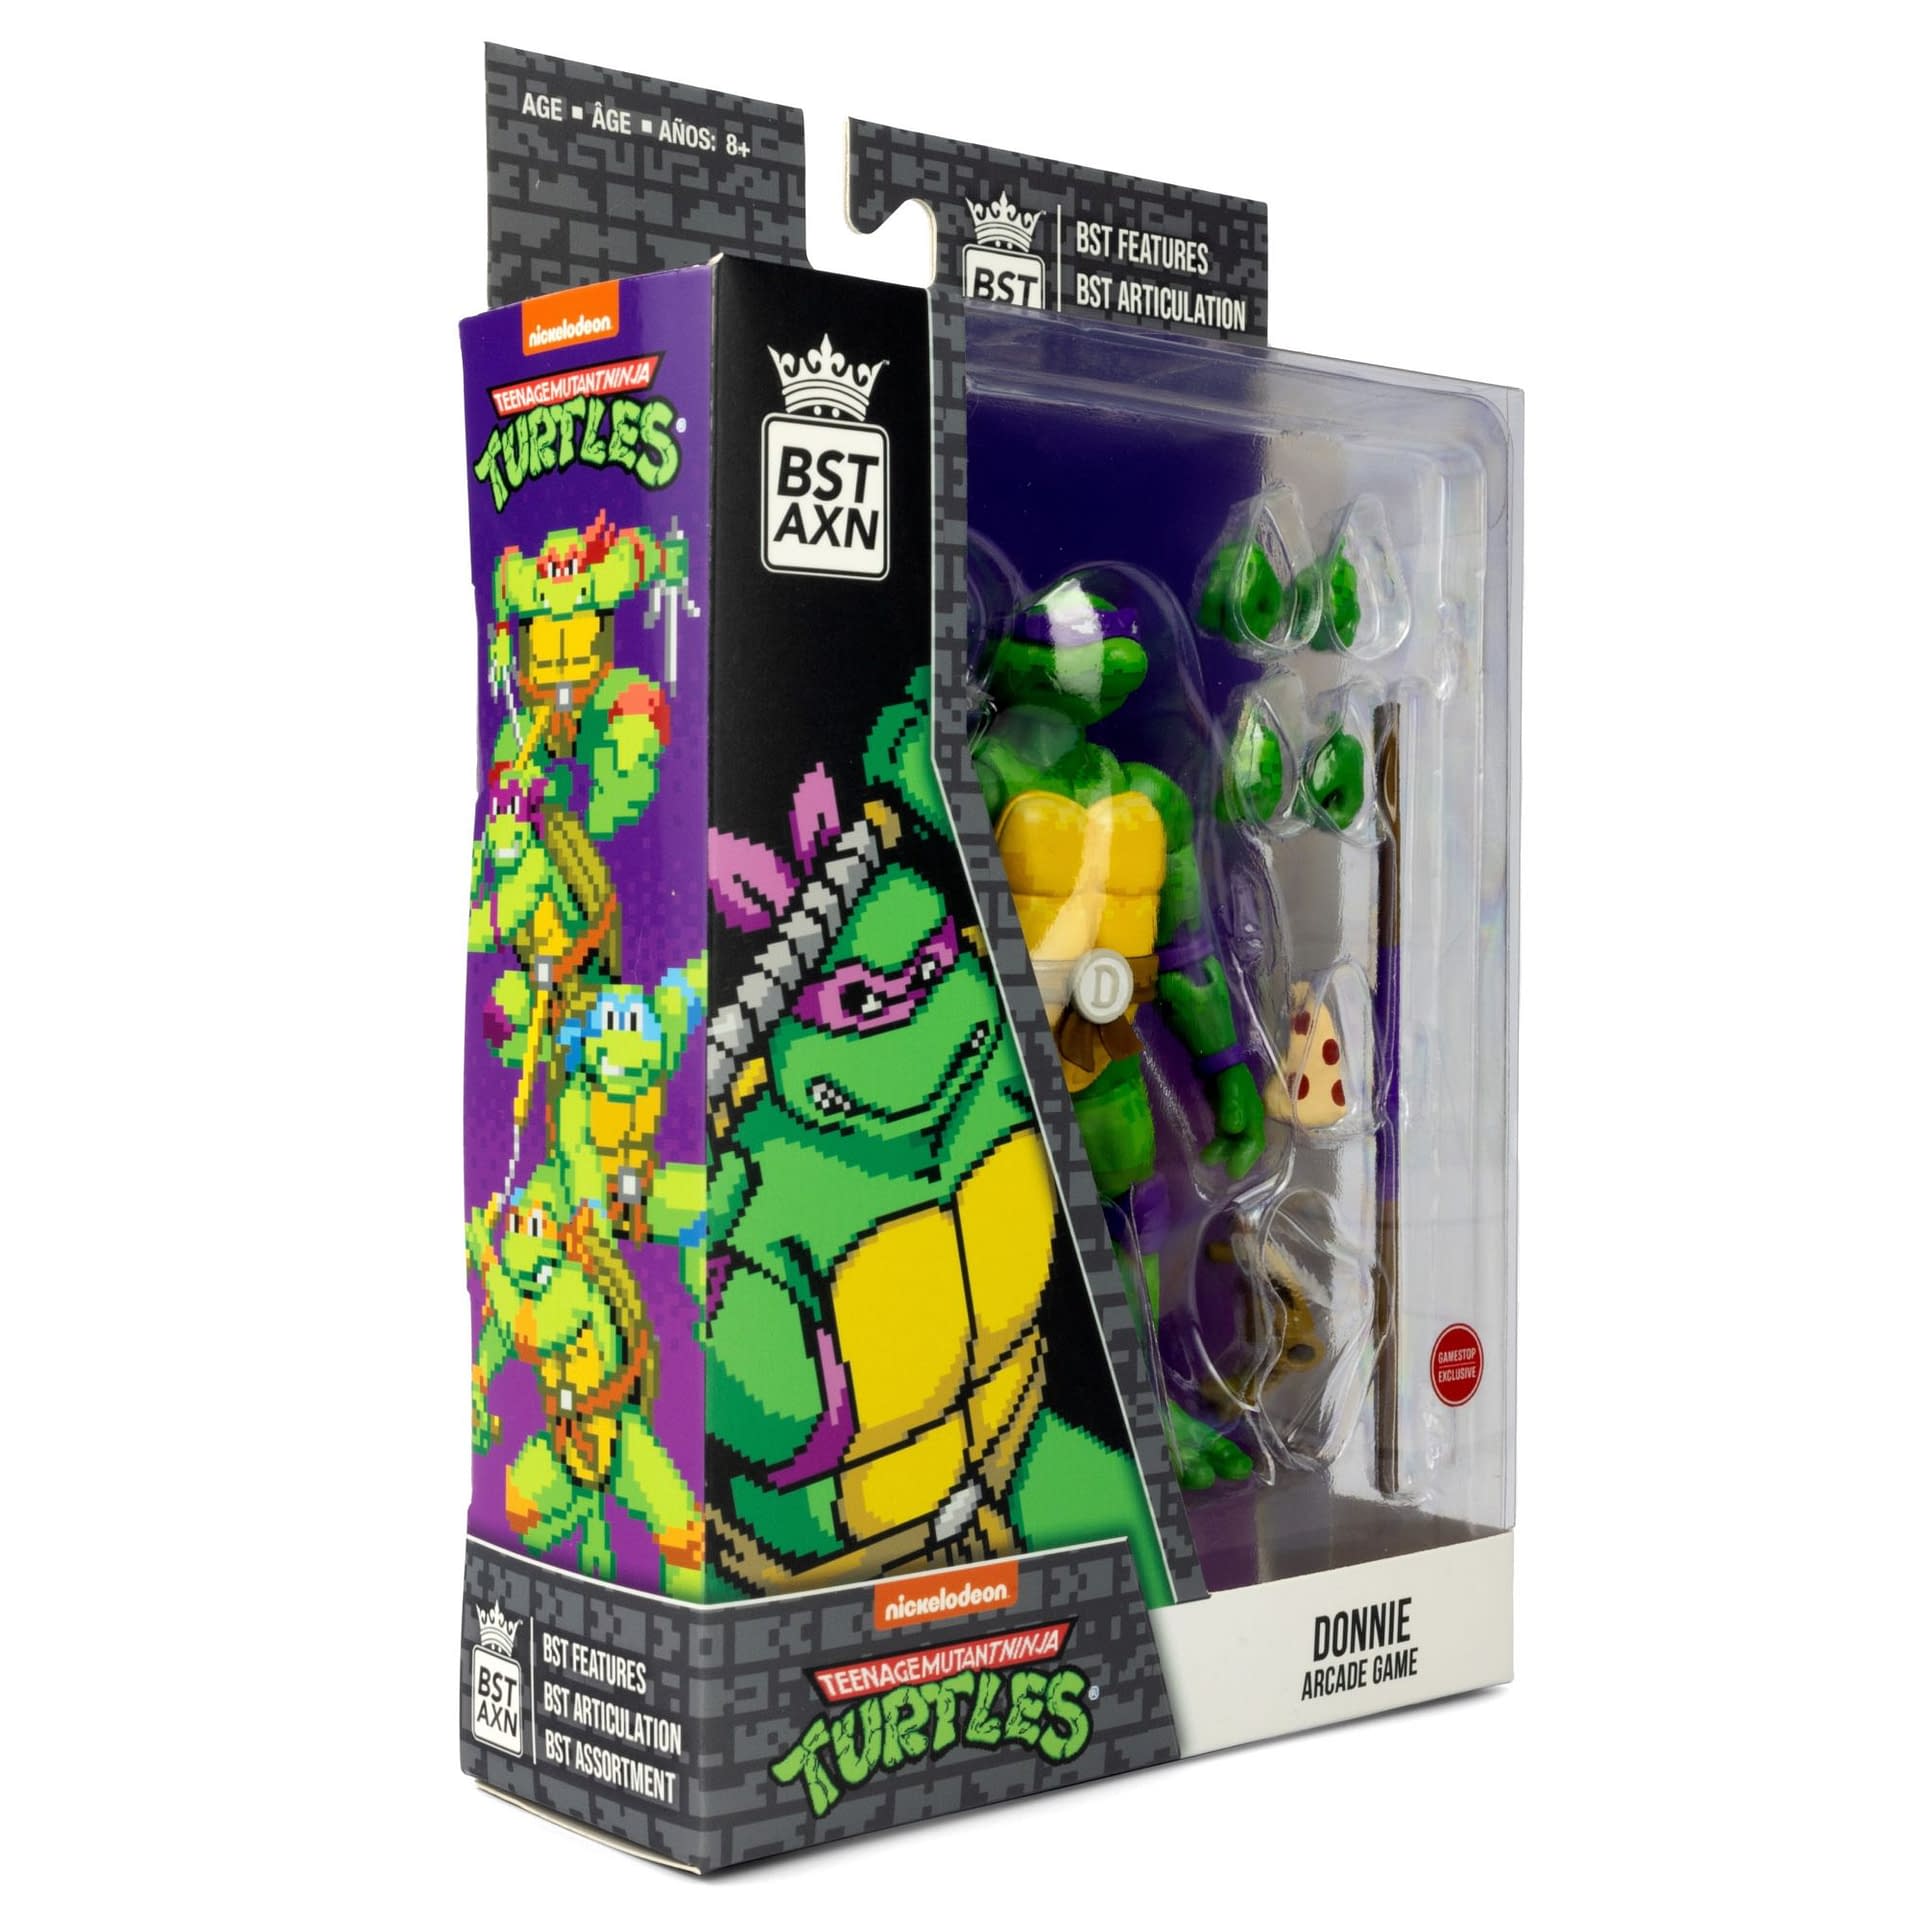 TMNT Gets Pixelated with The Loyal Subject's New GameStop Exclusives